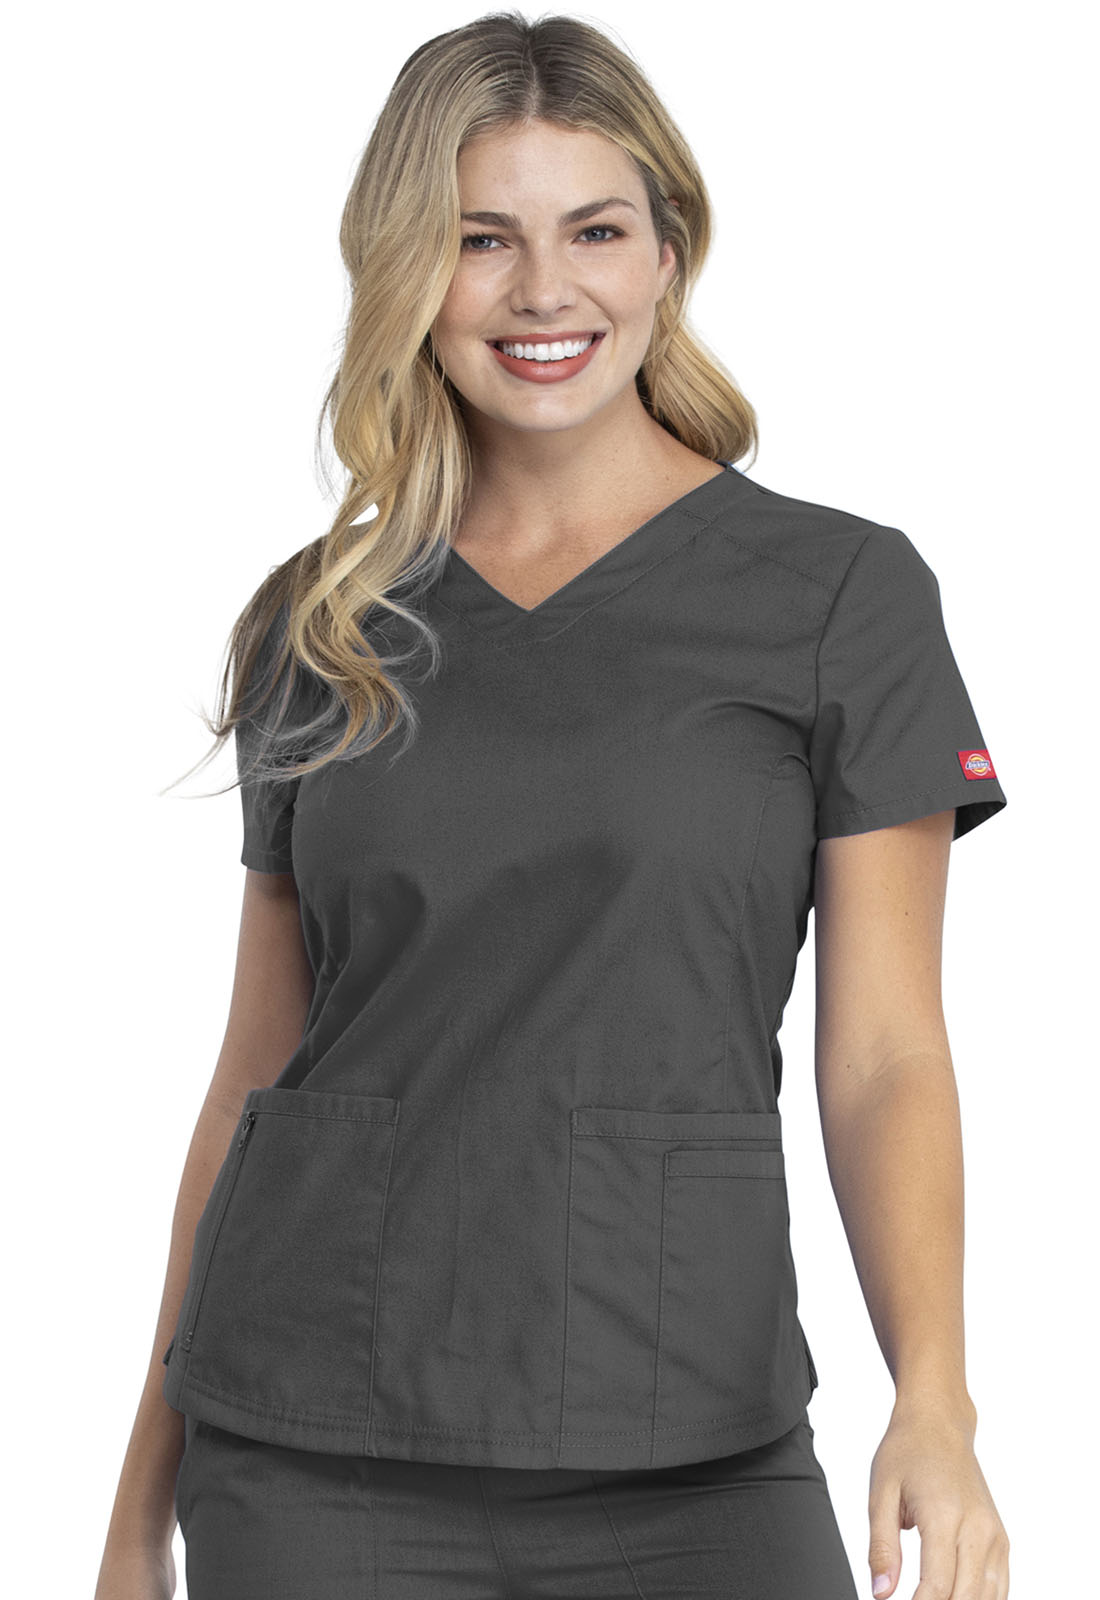 Dickies Signature V-Neck Top Pewter from Dickies